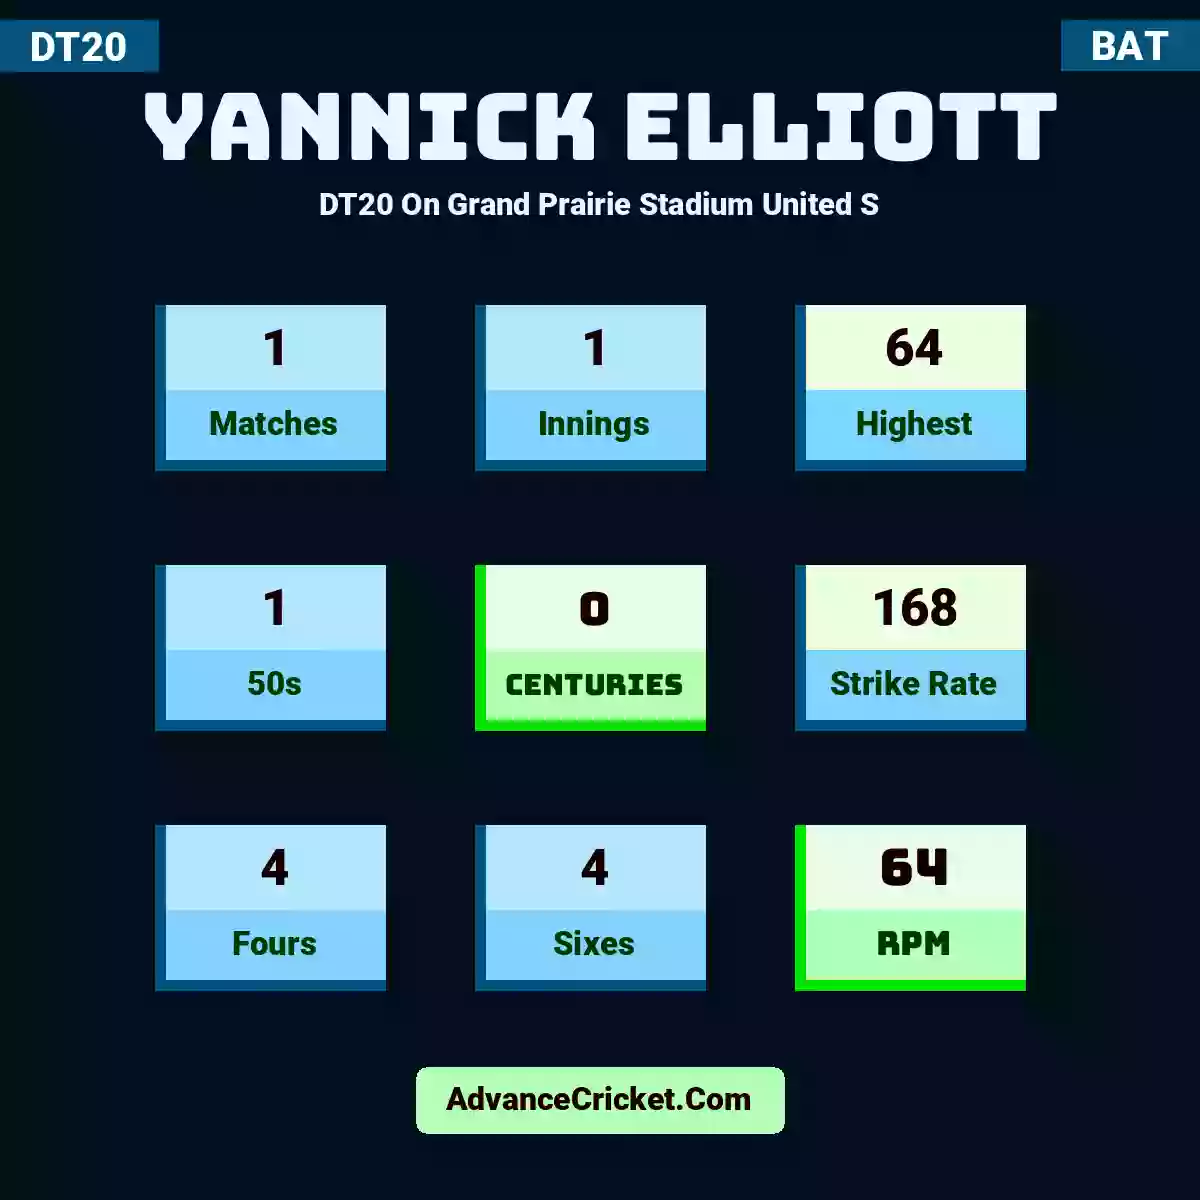 Yannick Elliott DT20  On Grand Prairie Stadium United S, Yannick Elliott played 1 matches, scored 64 runs as highest, 1 half-centuries, and 0 centuries, with a strike rate of 168. Y.Elliott hit 4 fours and 4 sixes, with an RPM of 64.